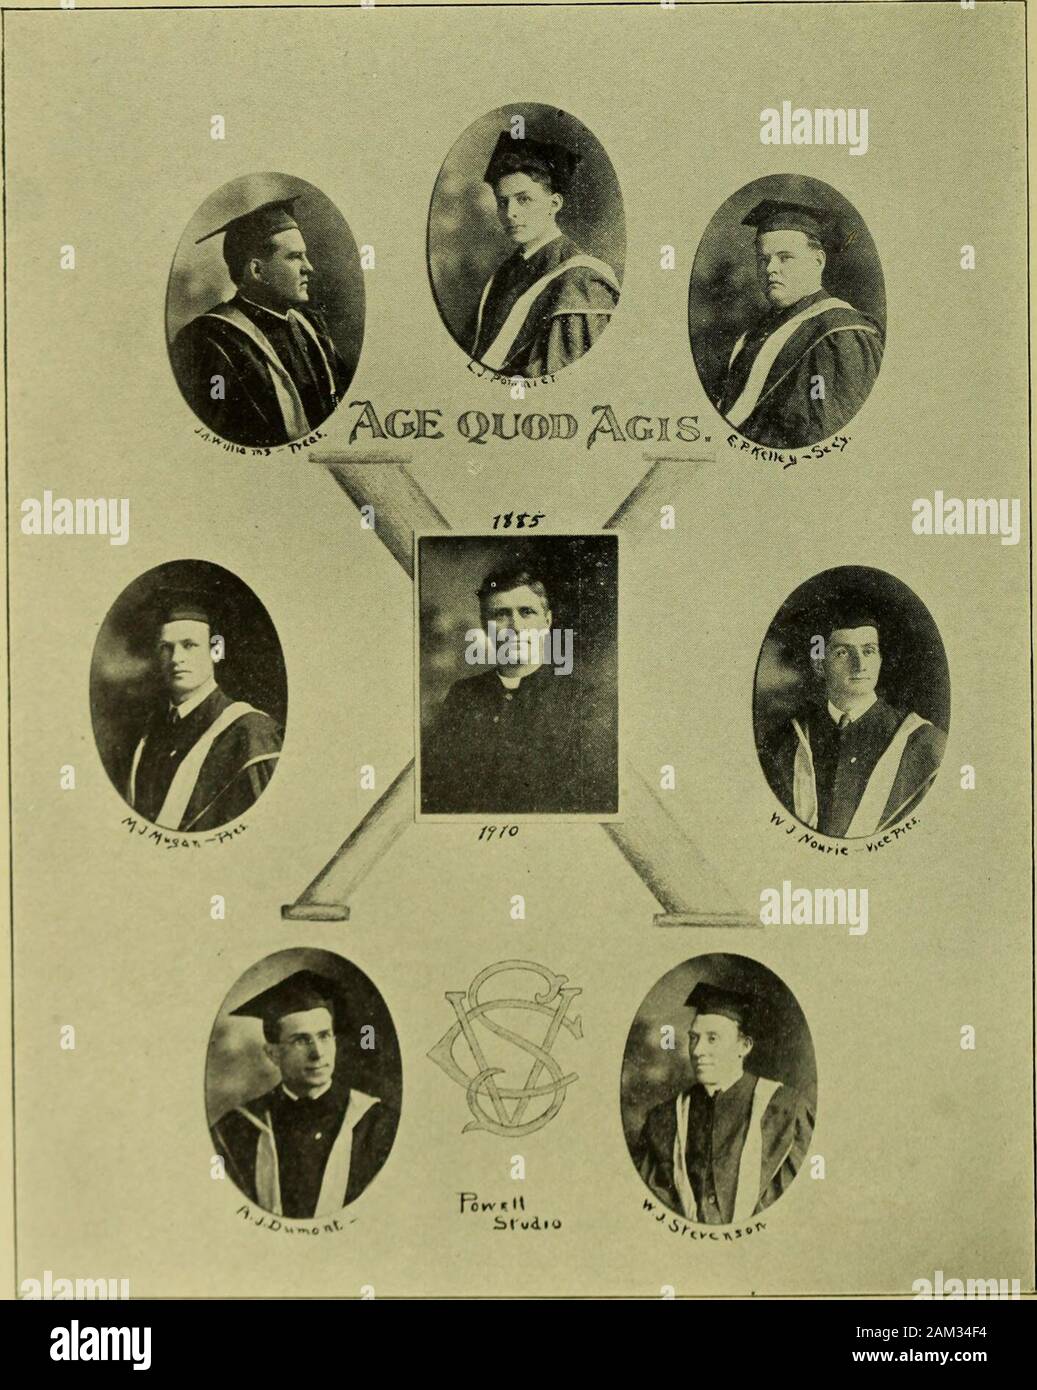 Annual catalog StViator College . homore and Freshmen Classes. HIGH SCHOOL DEPARTMENT REV. J. V. RHEAMS, C.S.V., A.M..Mathematics. REV. W. J. CLIFFORD, C.S.V, A.M.,Latin and English in the Fourth Year. REV. J. F. MOISANT, C.S.V., A.M.,Elementary Sciences and Latin. REV. T. J. RICE, C.S.V., A.M.,Penmanship, Advanced Arithmetic. REV. C. A. ST. AMANT, C.S.V, A.M.,French, Latin, History, Christian Doctrine in Third Year. REV. P. F. BROWN, C.S.V., A.M.,History and Christian Doctrine in Second and Fourth Years.Latin in First Year. F. A. SHERIDAN, C.S.V., A.M.,English. V. U. LECLAIR, C.S.V., A.B.,Fir Stock Photo